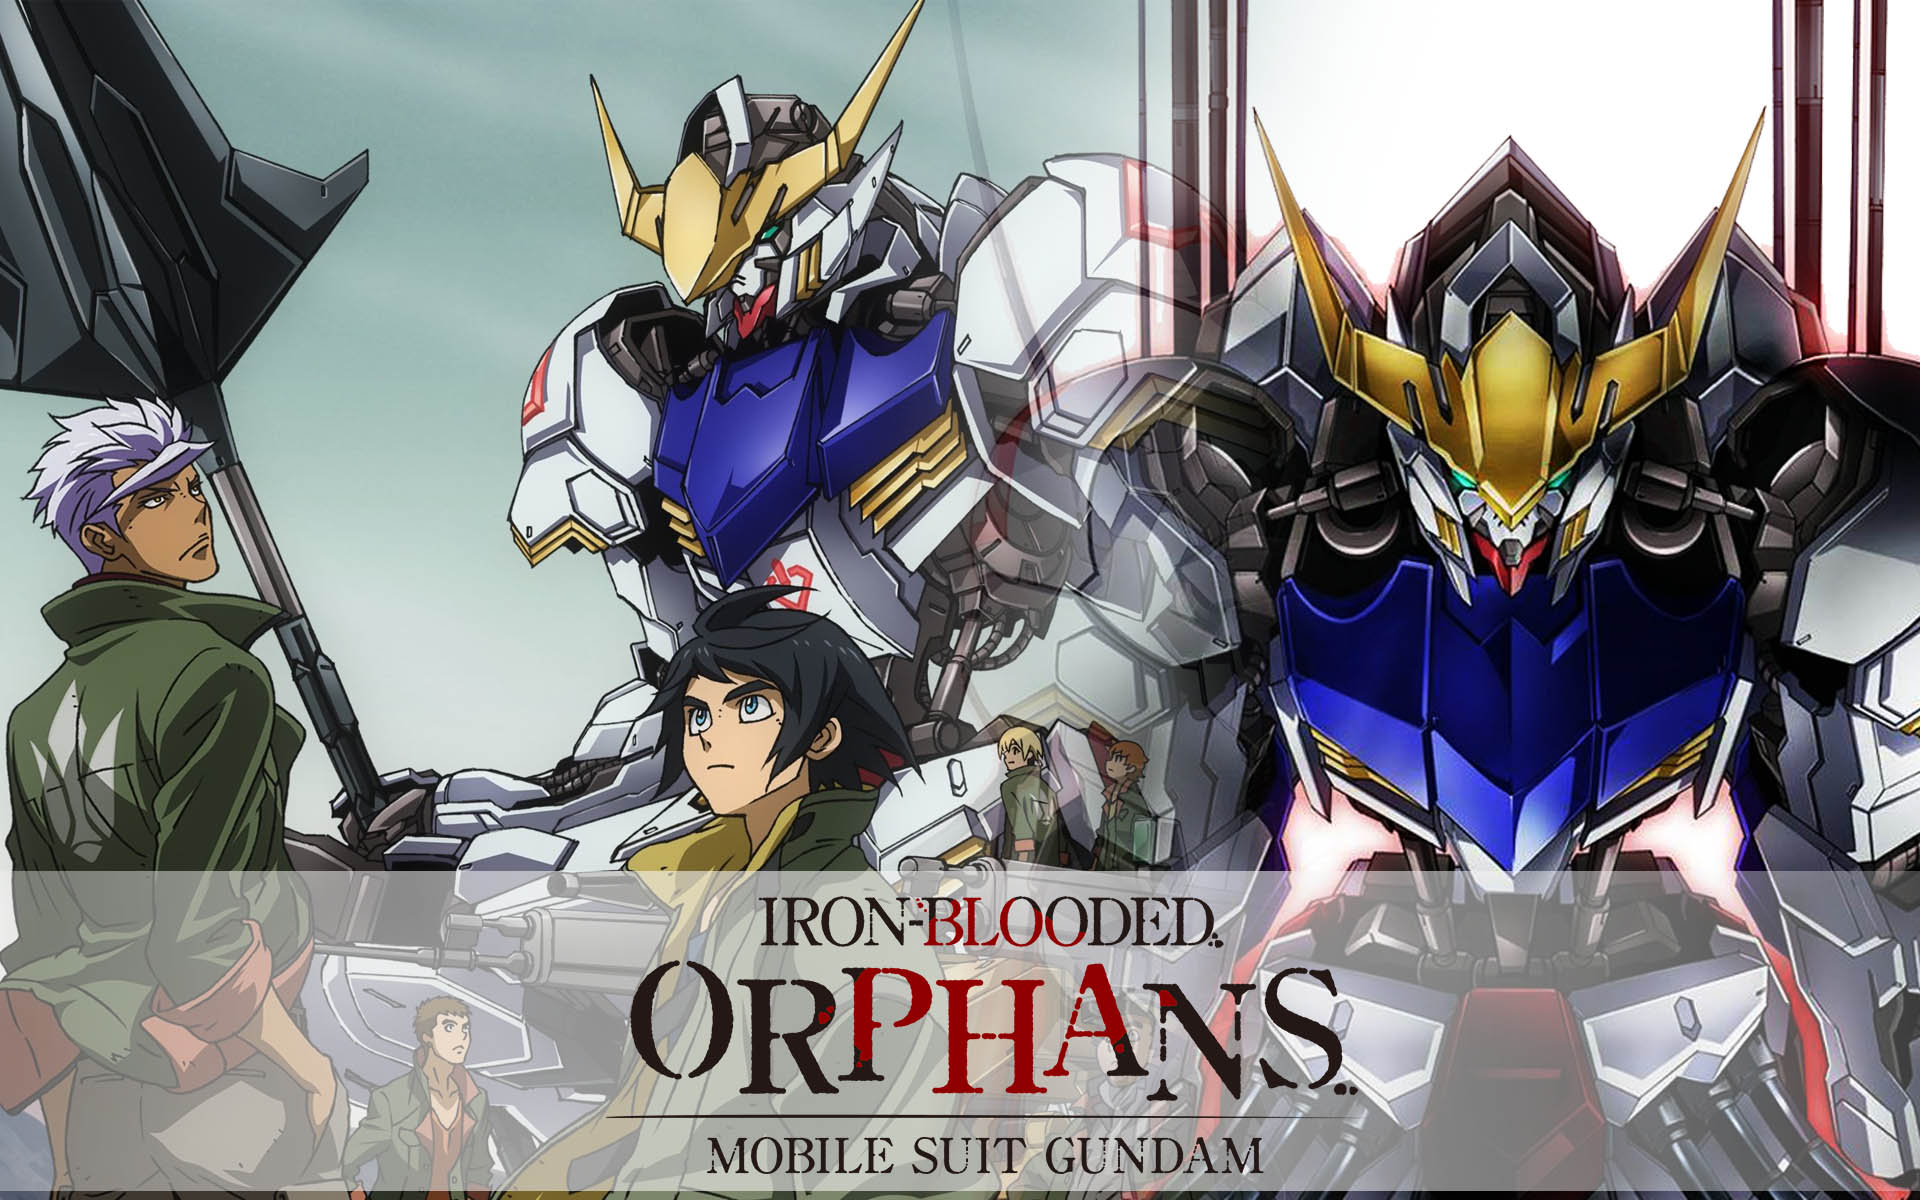 Mobile Suit Gundam: Iron-Blooded Orphans #1